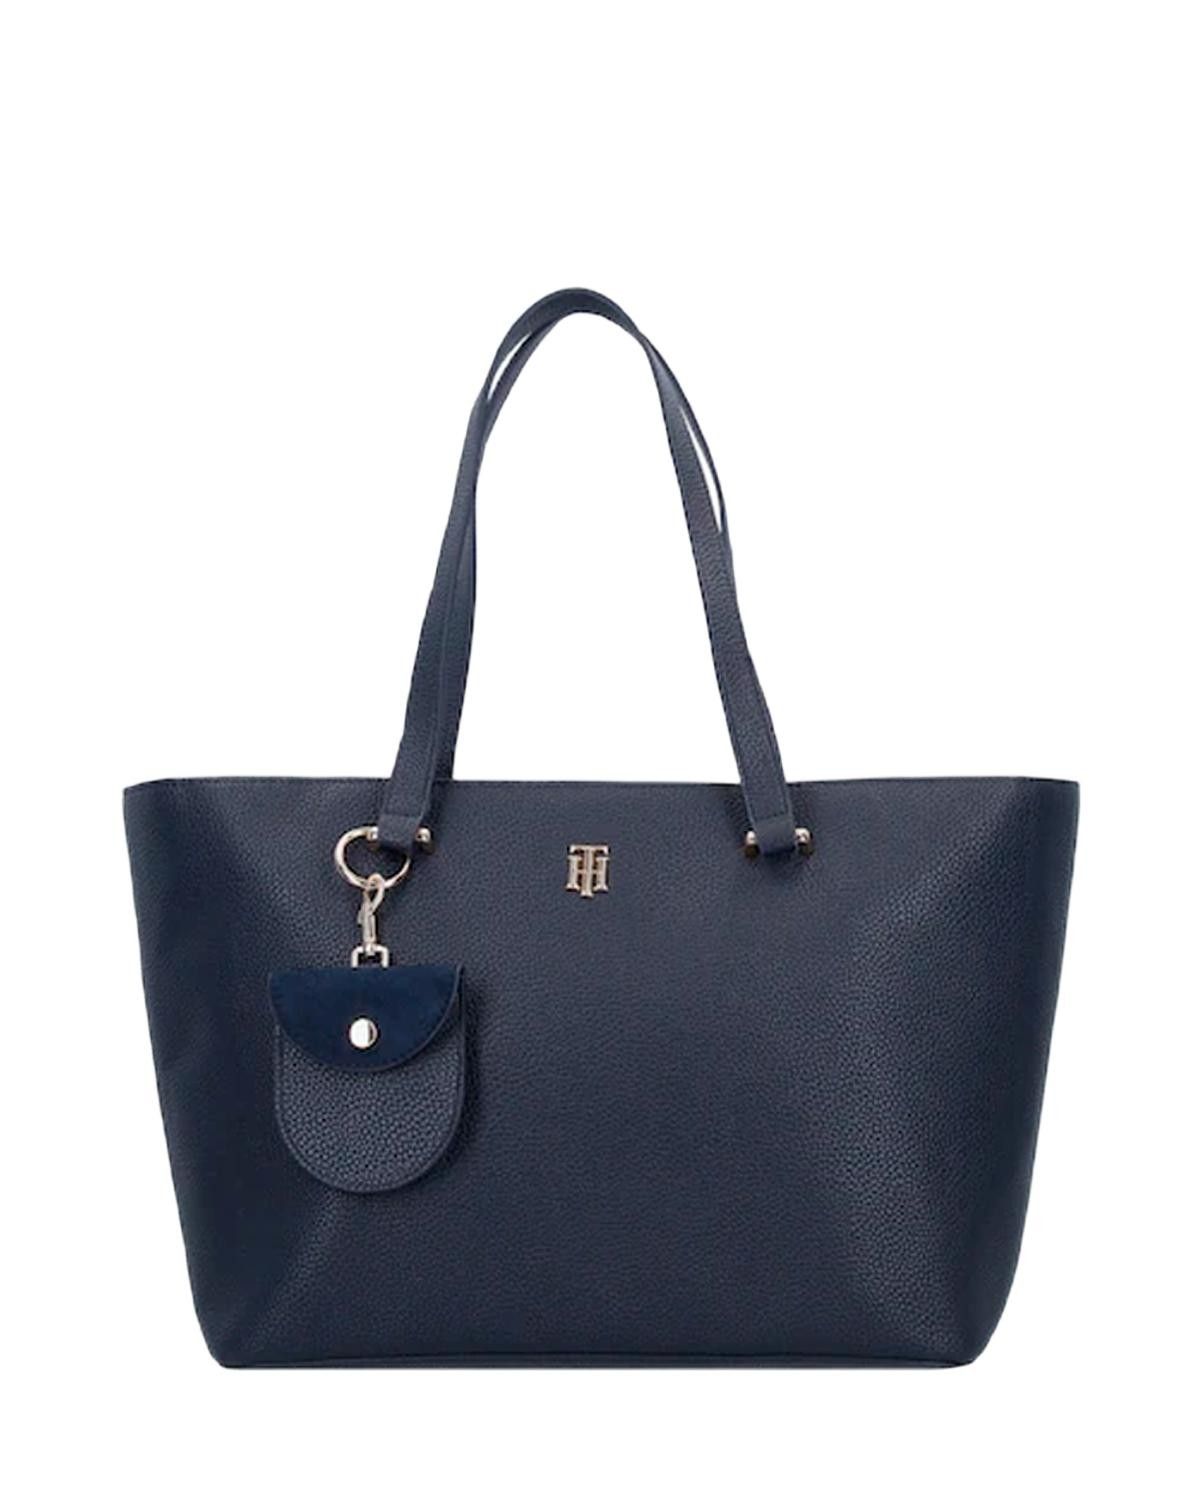 Brand: Tommy Hilfiger Gender: Women Type: Bags Season: Spring/Summer  PRODUCT DETAIL • Color: blue • Pattern: plain • Size (cm): 27 x 34 x 15 cm • Details: -handbag   COMPOSITION AND MATERIAL • Composition: -100%  polyurethane  •  Washing: machine wash at 30°